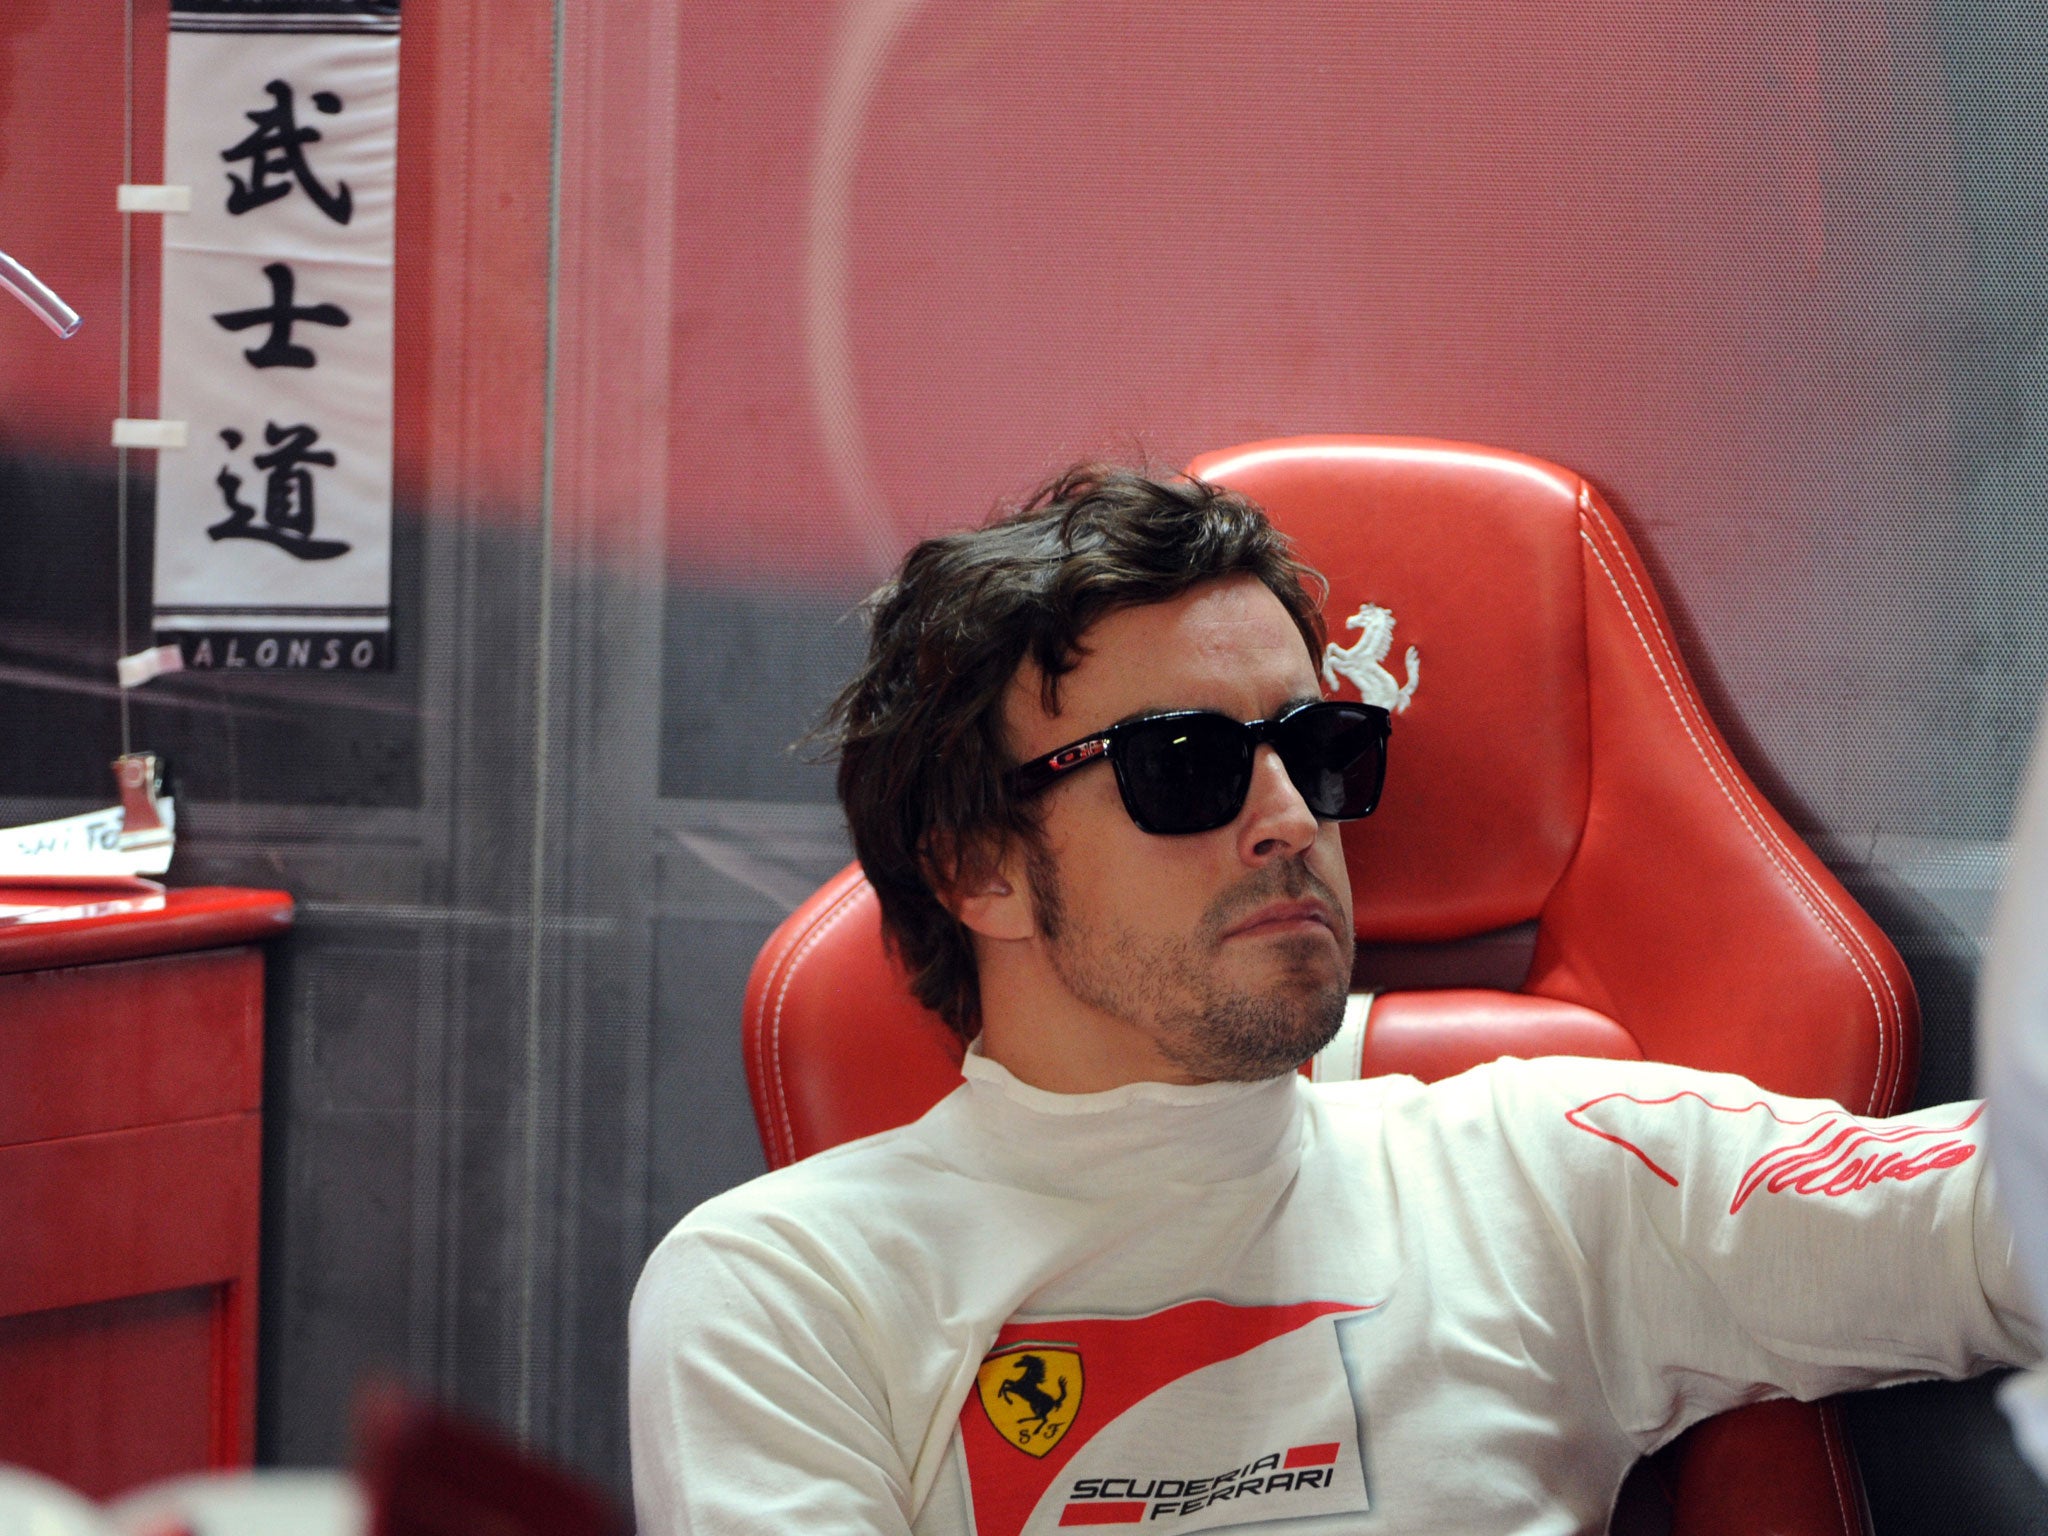 Fernando Alonso has admitted defeat in the race for the 2013 Formula One drivers' championship